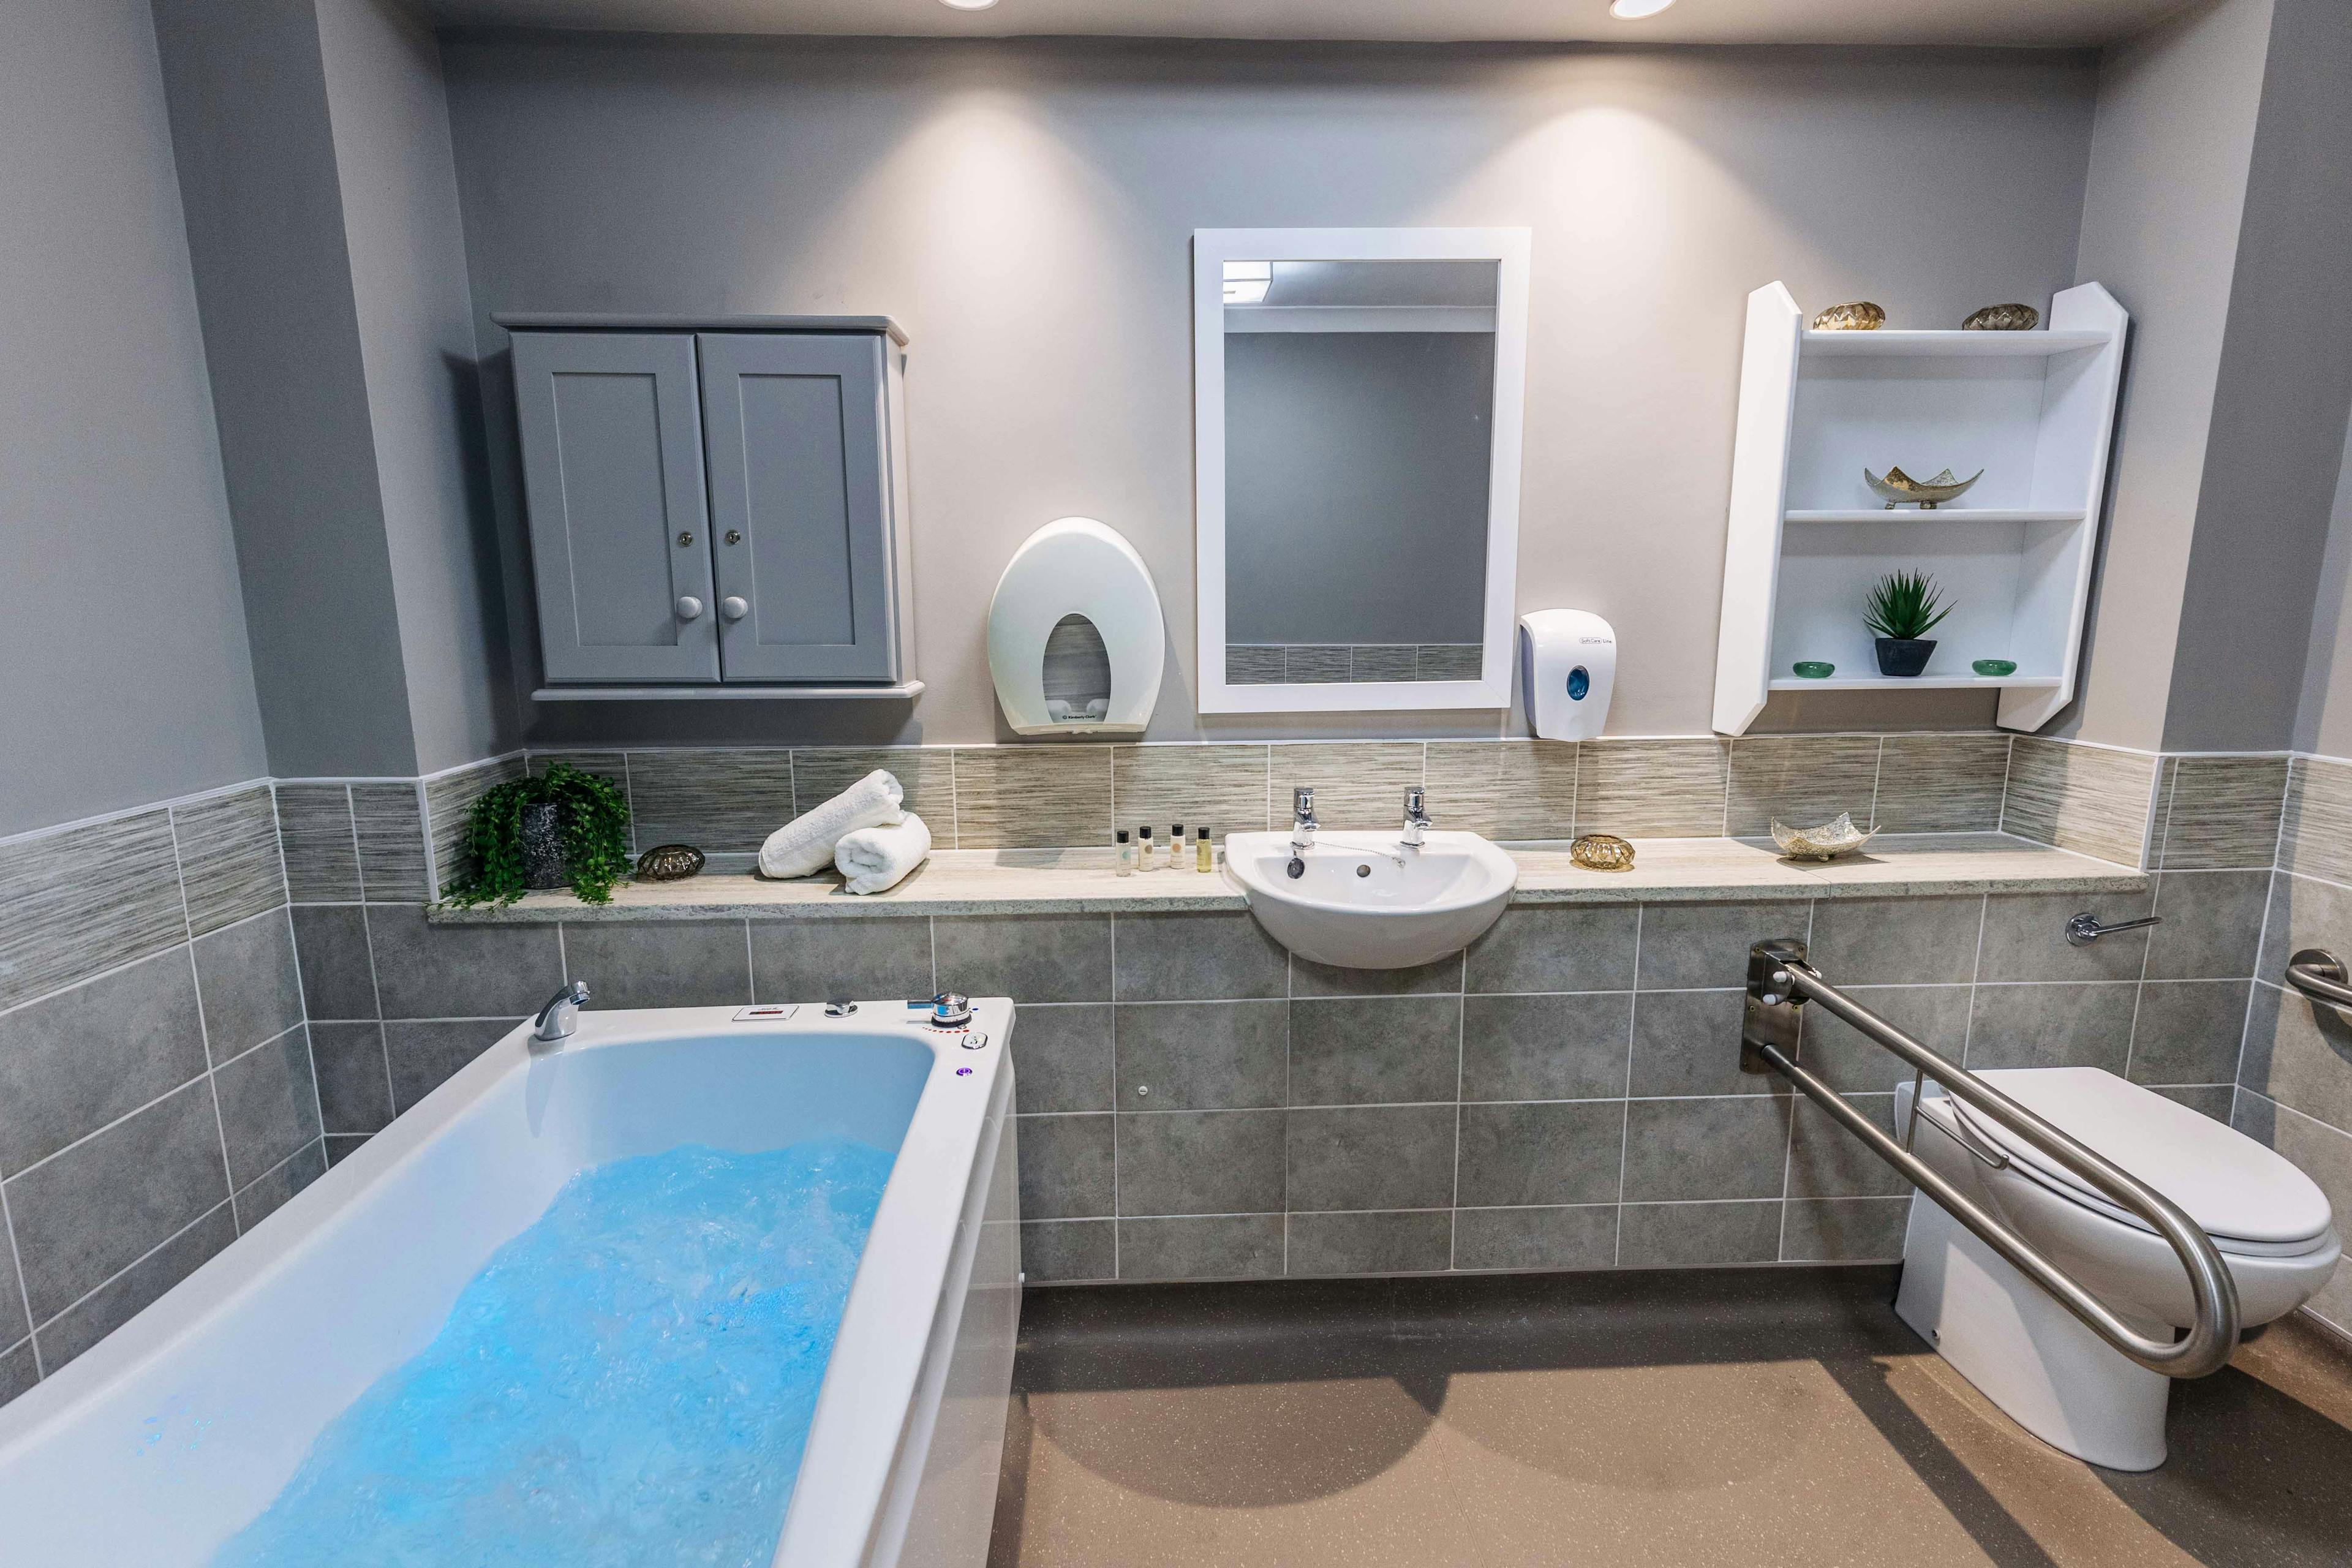 Bathroom at Lawton Manor Care Home in Kidsgrove, Newcastle-under-Lyme